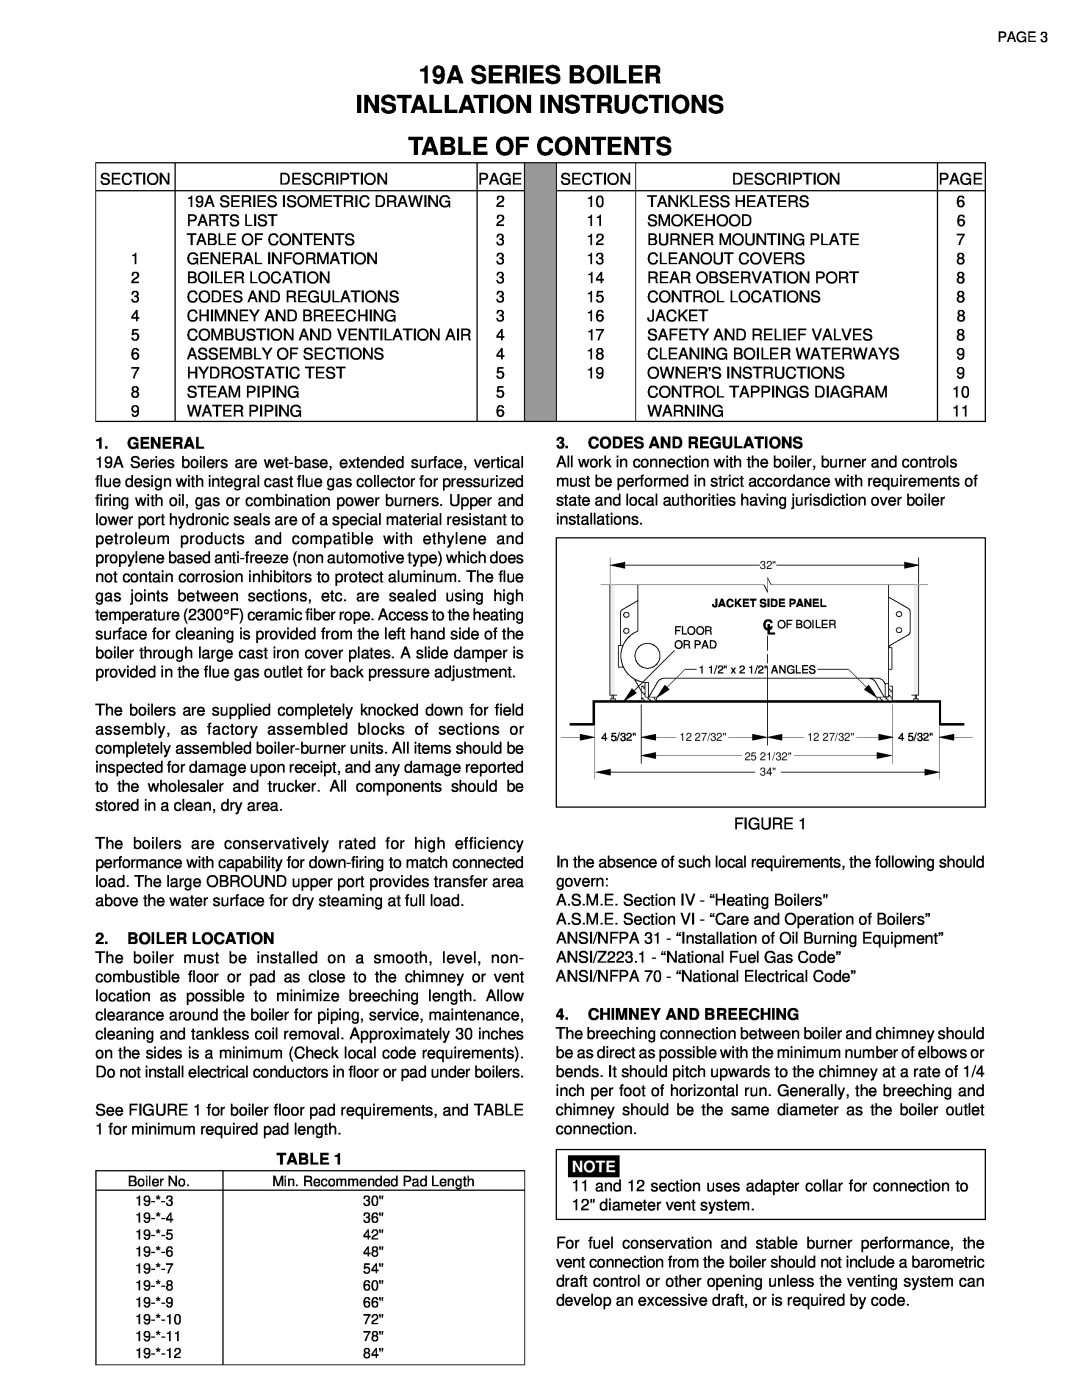 Smith Cast Iron Boilers Table Of Contents, 19A SERIES BOILER INSTALLATION INSTRUCTIONS, General, Boiler Location 